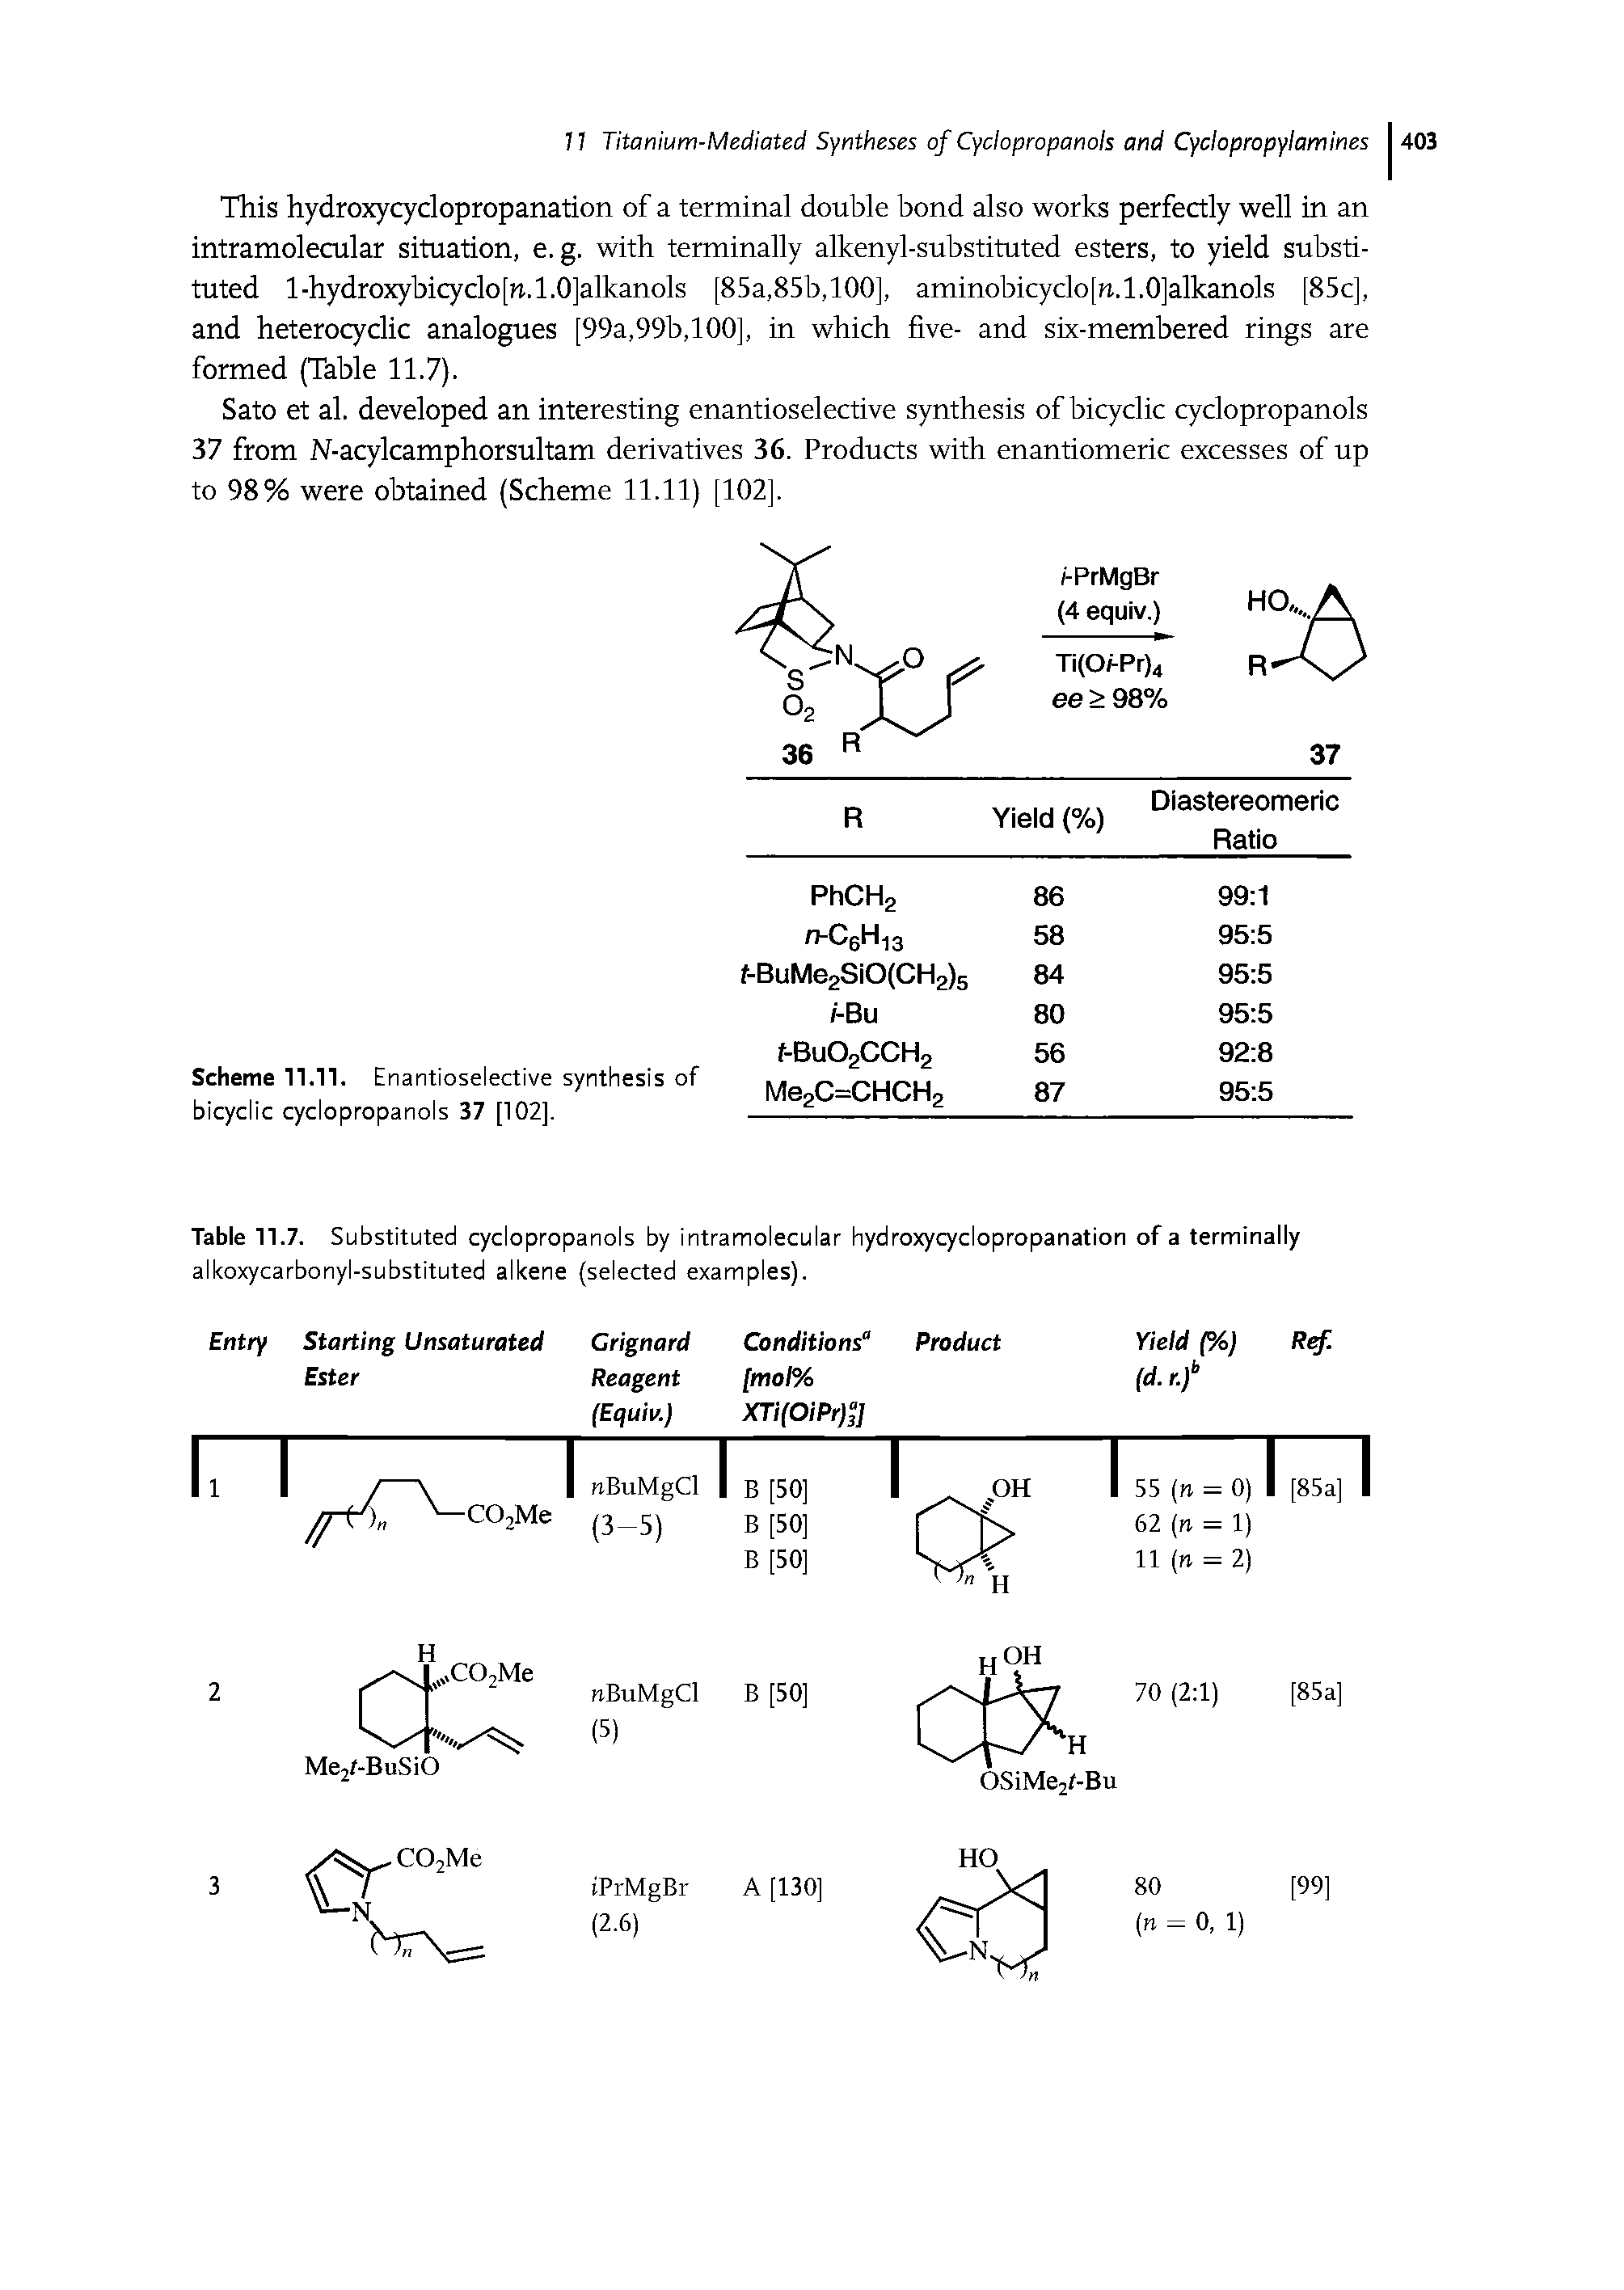 Table 11.7. Substituted cyciopropanols by intramolecular hydroxycyclopropanation of a terminally alkoxycarbonyl-substituted alkene (selected examples).